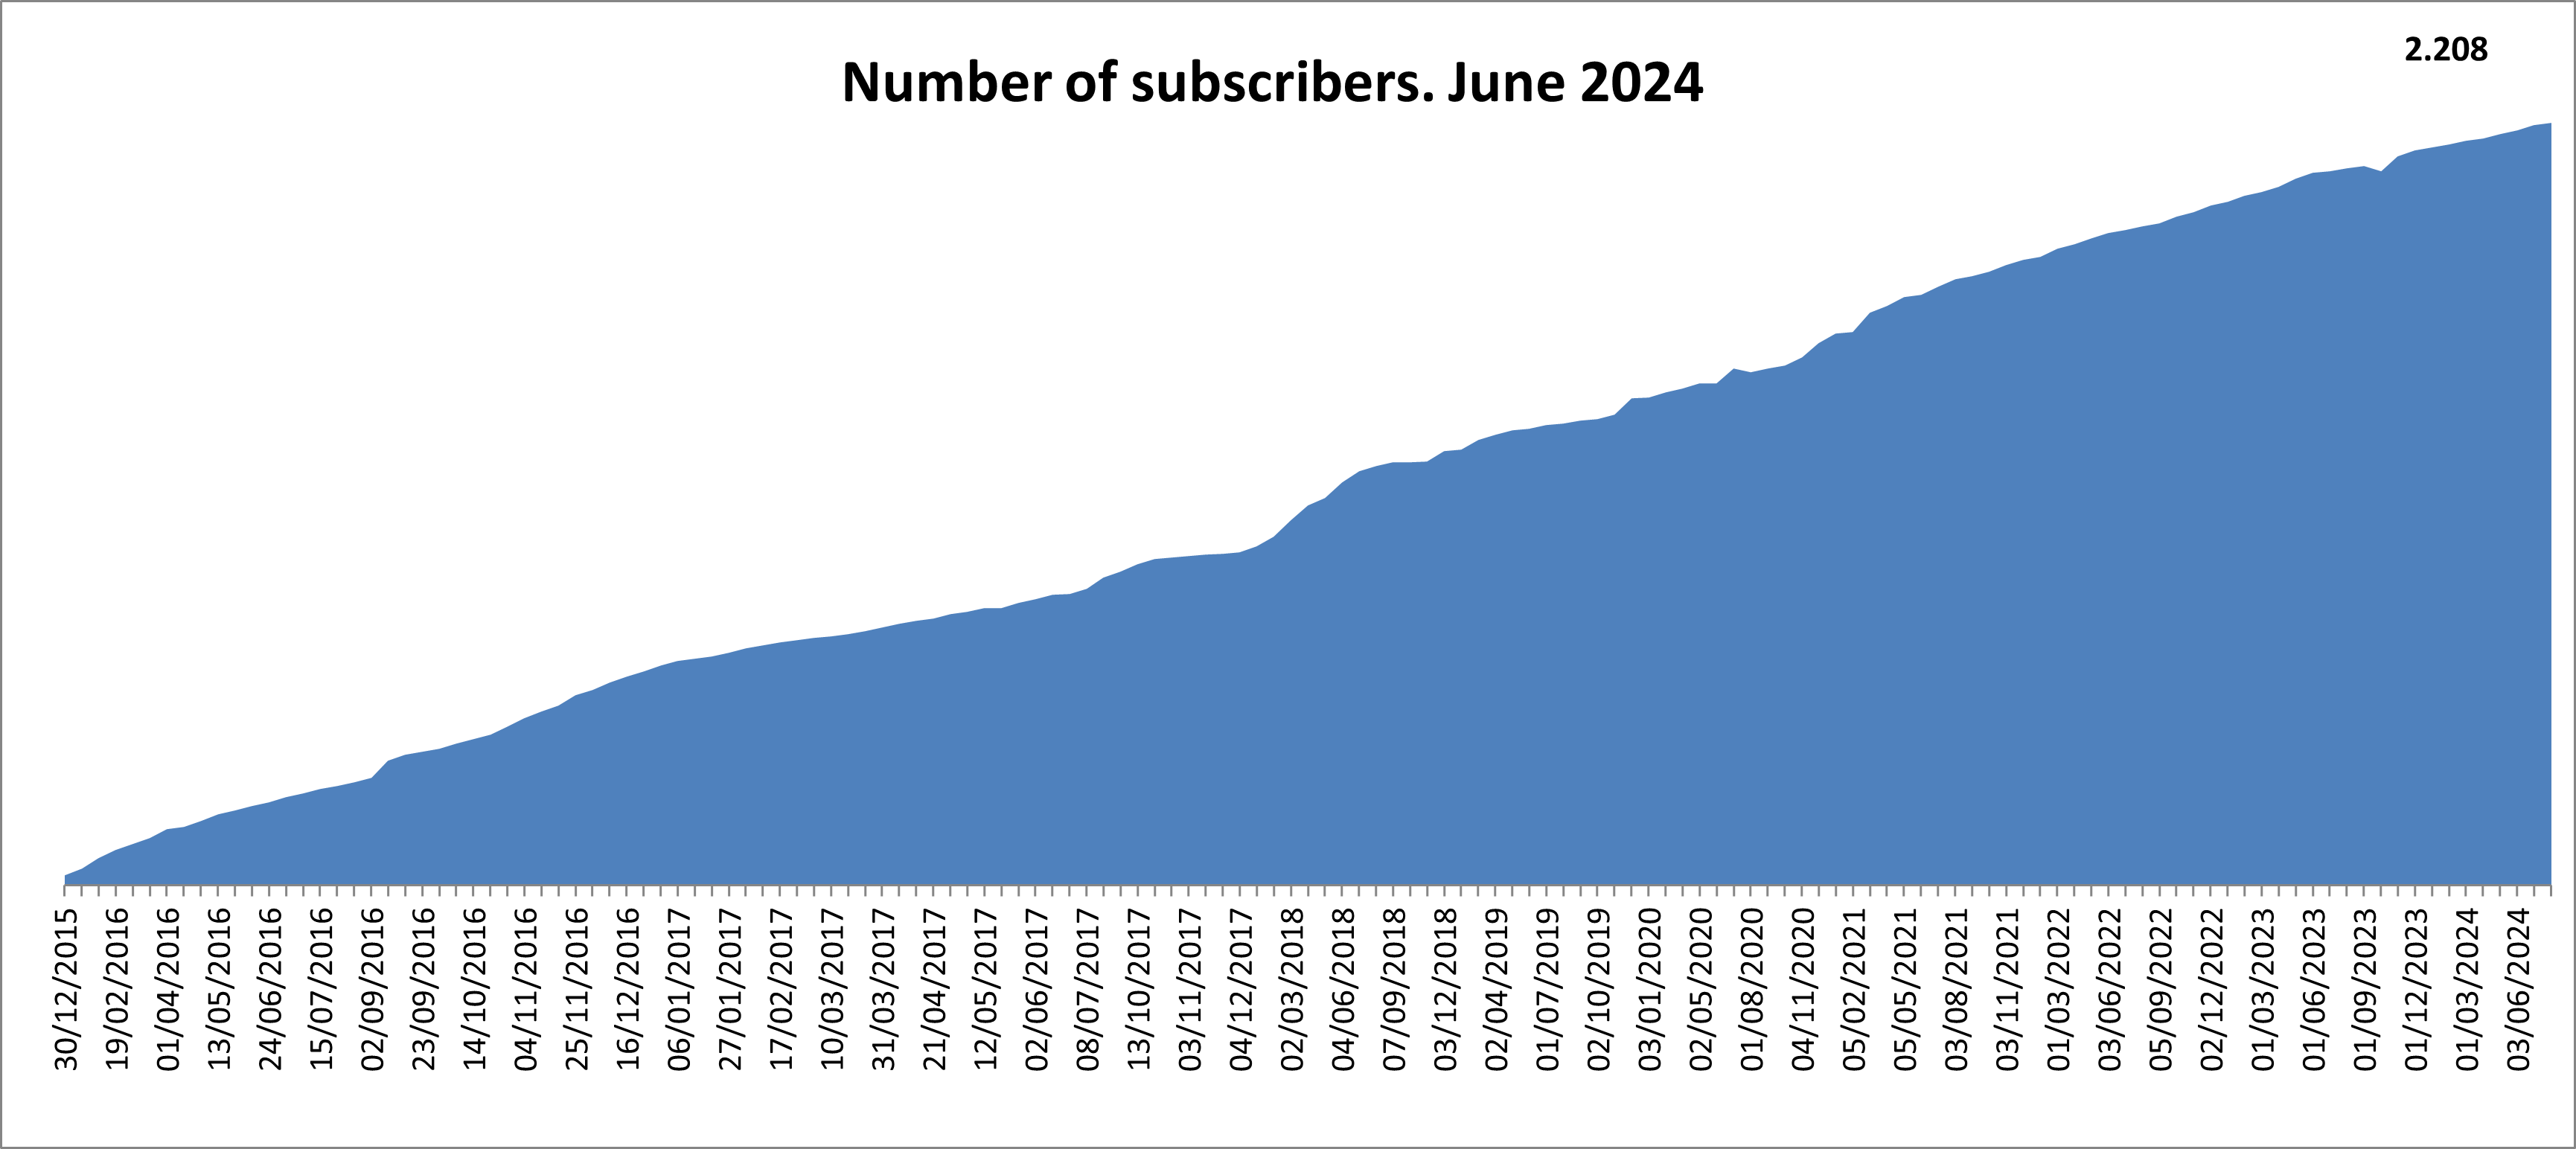 Number of subscribers 1875. March 2022